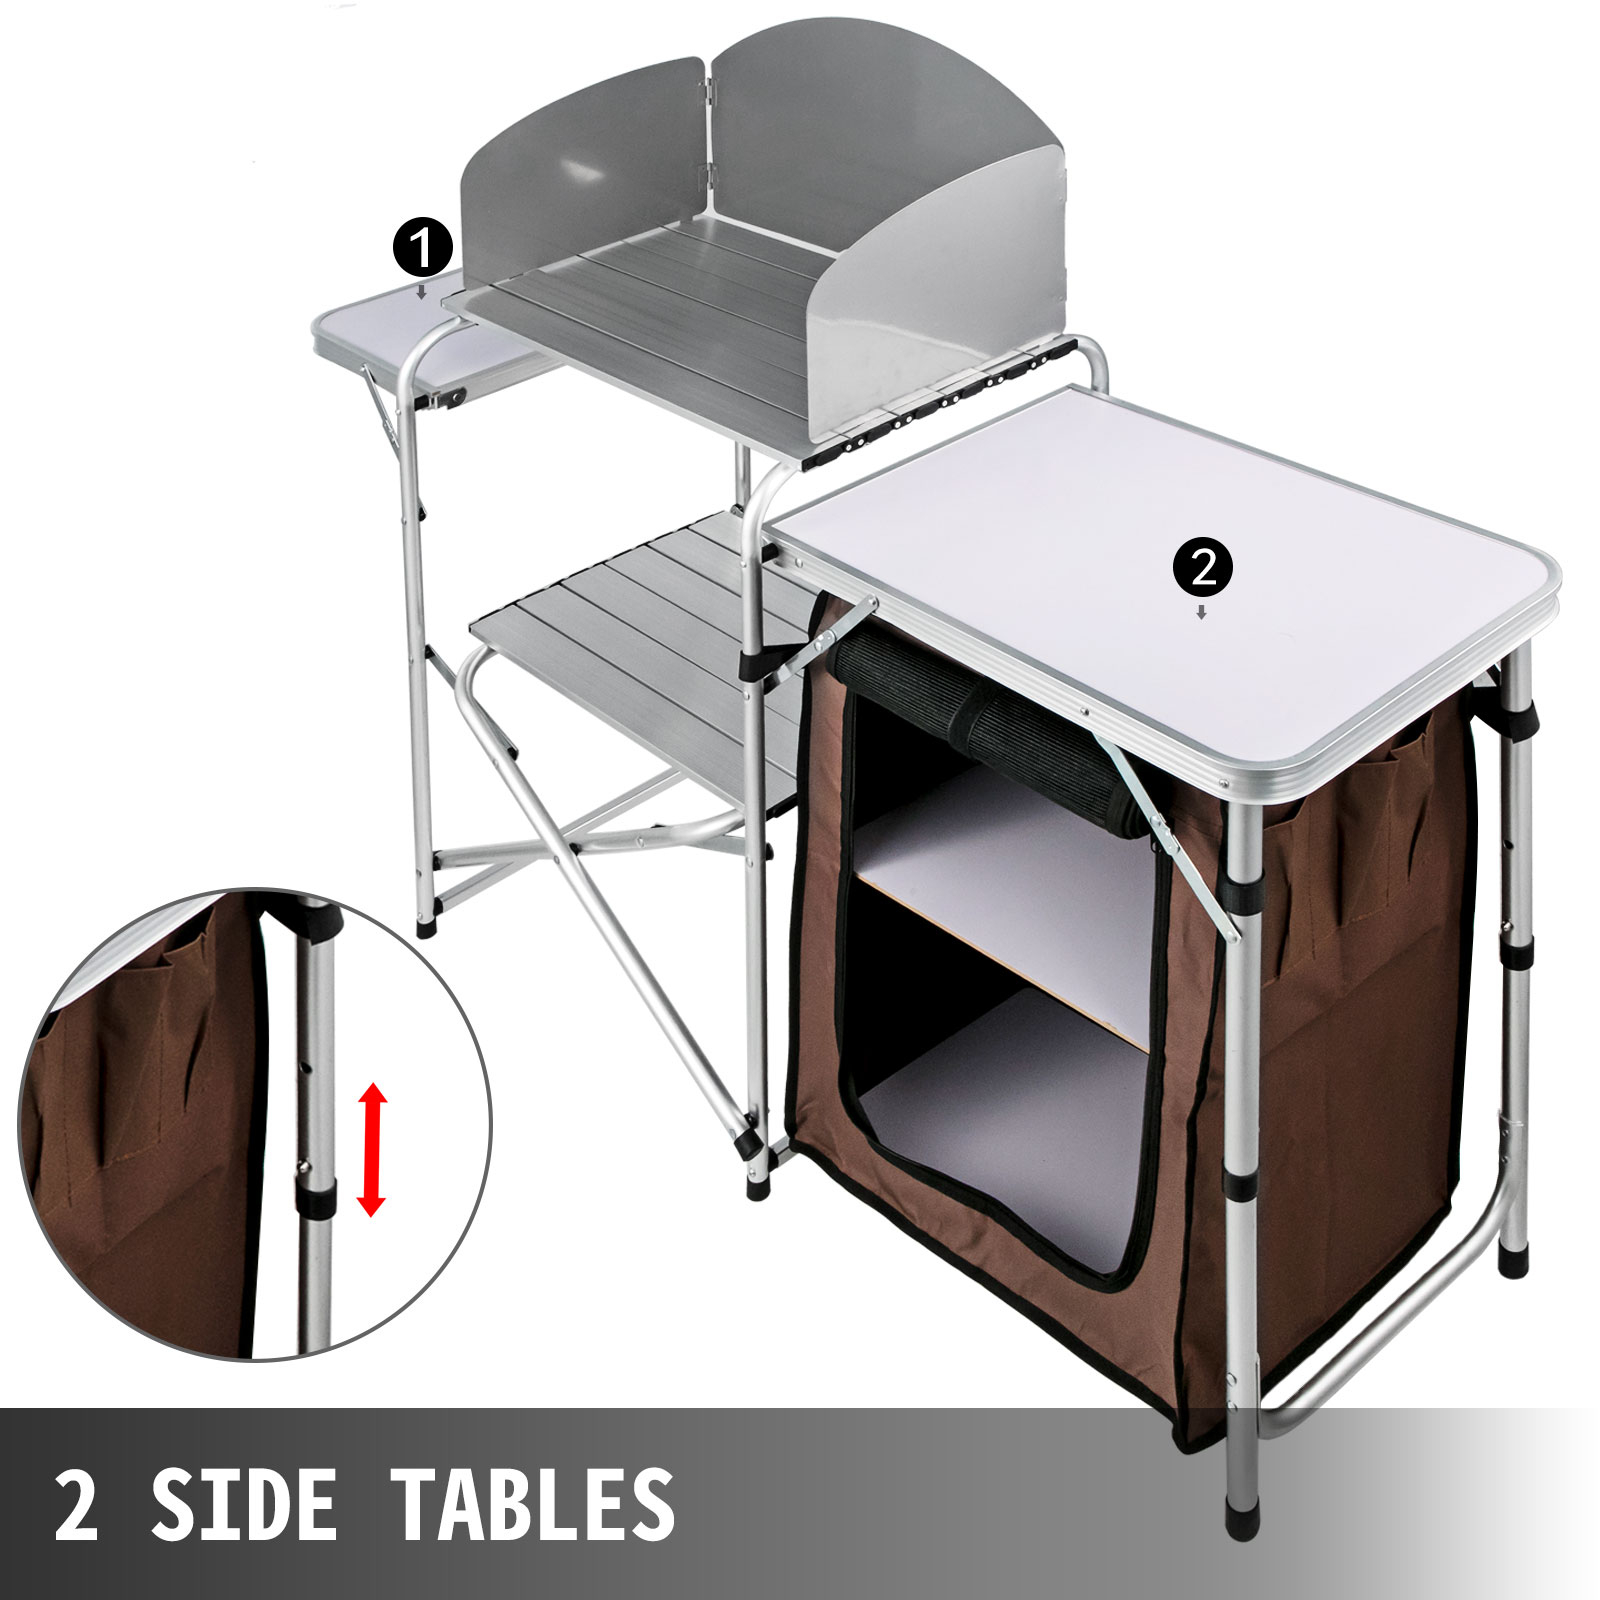 camping outdoor kitchen,Cook Table,foldable